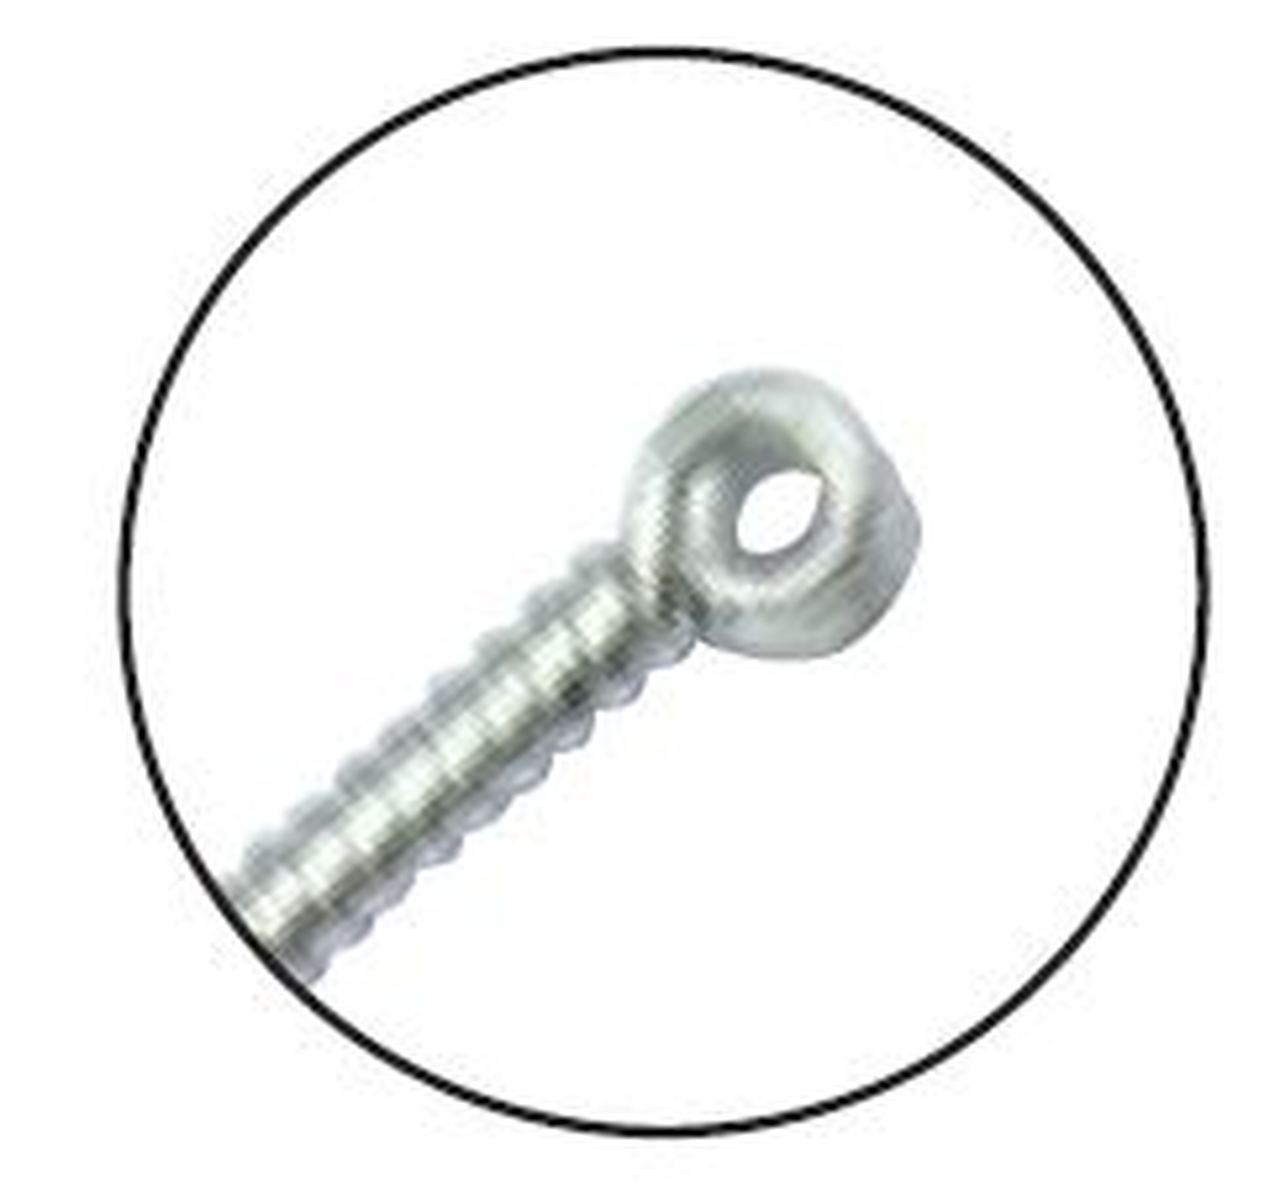 .25x13mm - Aculux C Series Spring Handle with loop - NO Guide Tube